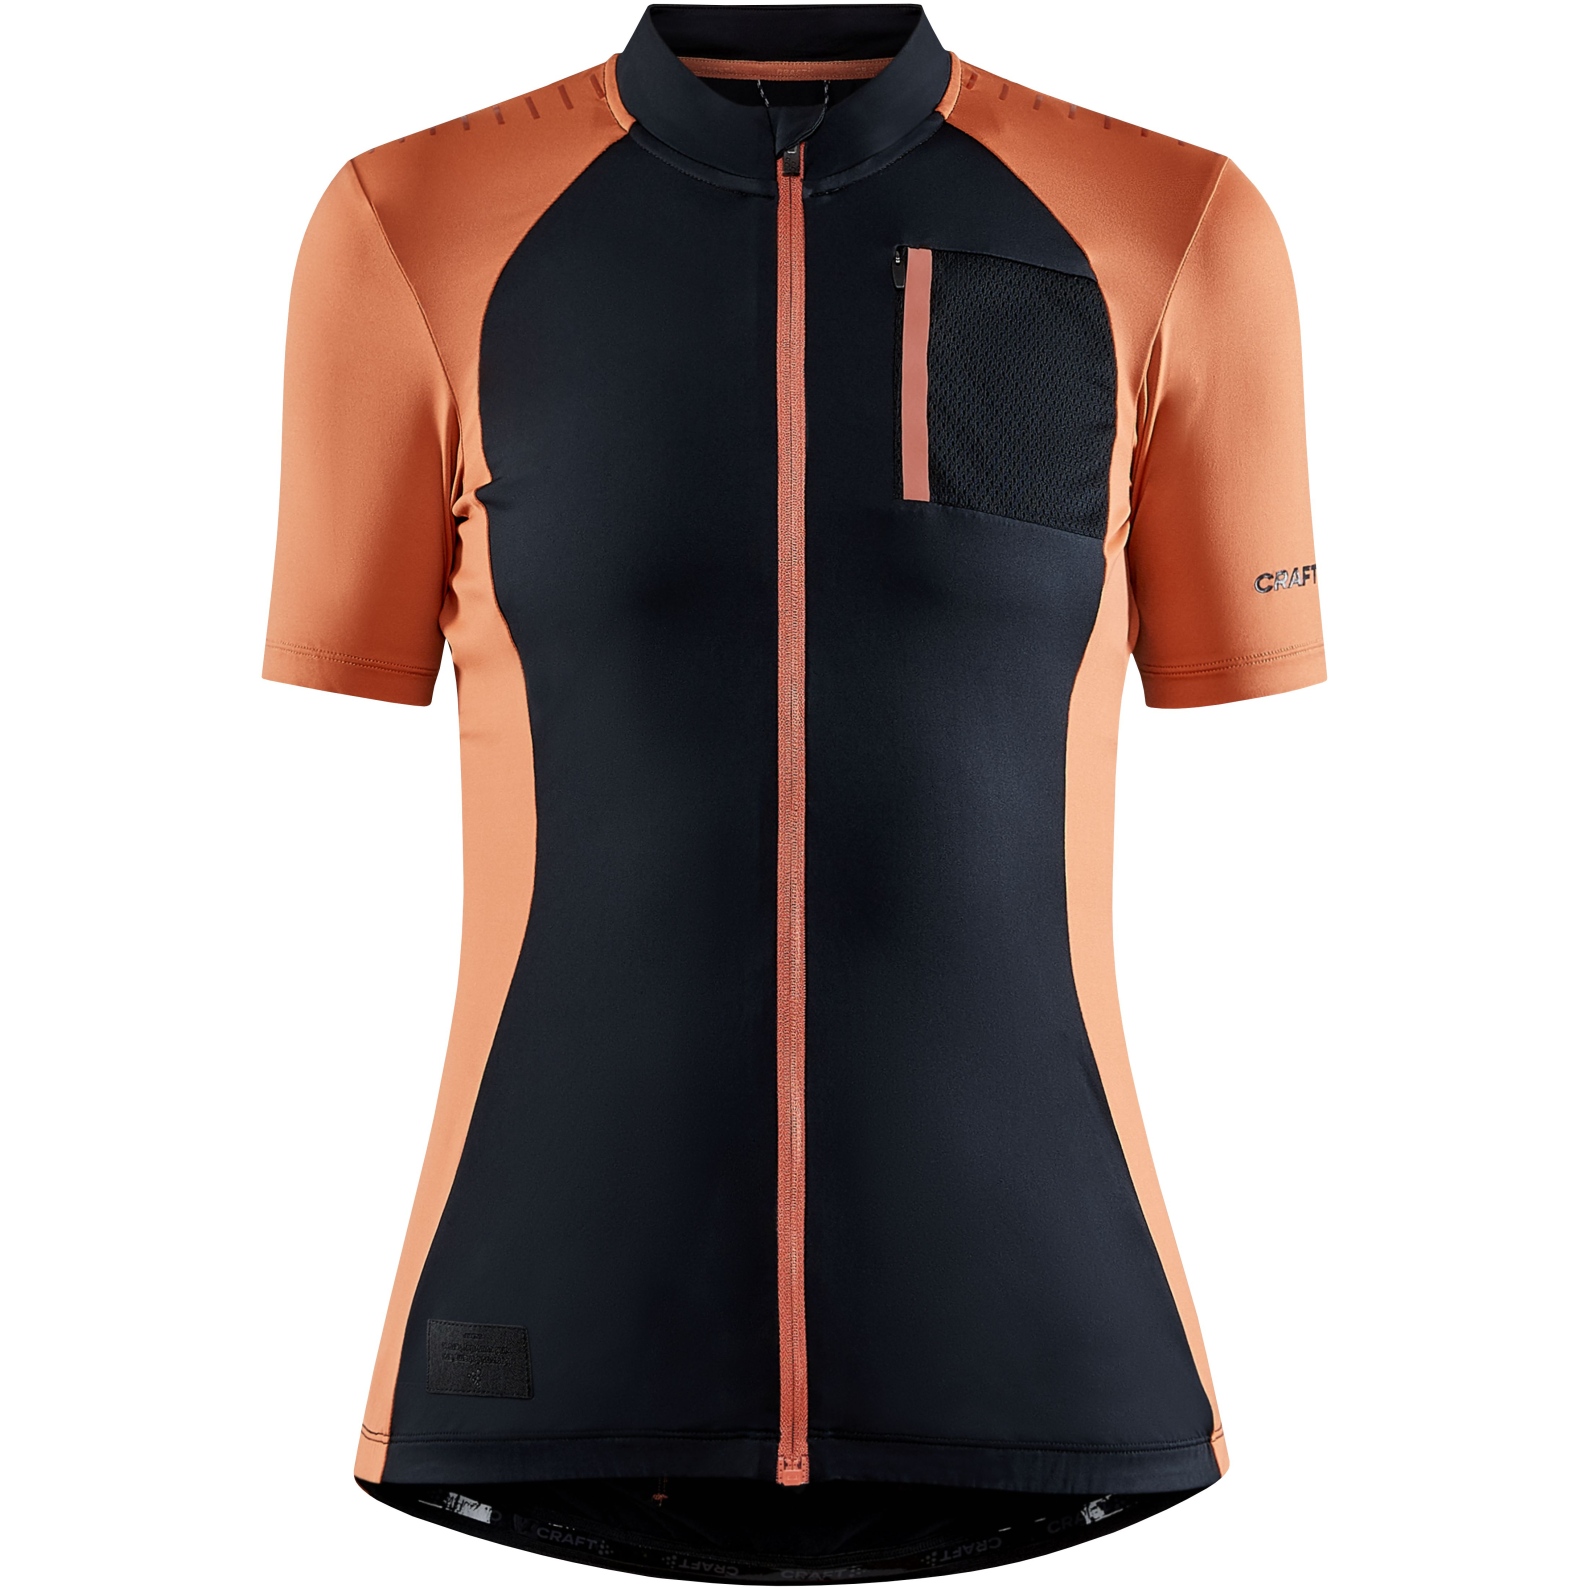 Picture of CRAFT ADV Offroad Jersey Women - Black/Terracotta